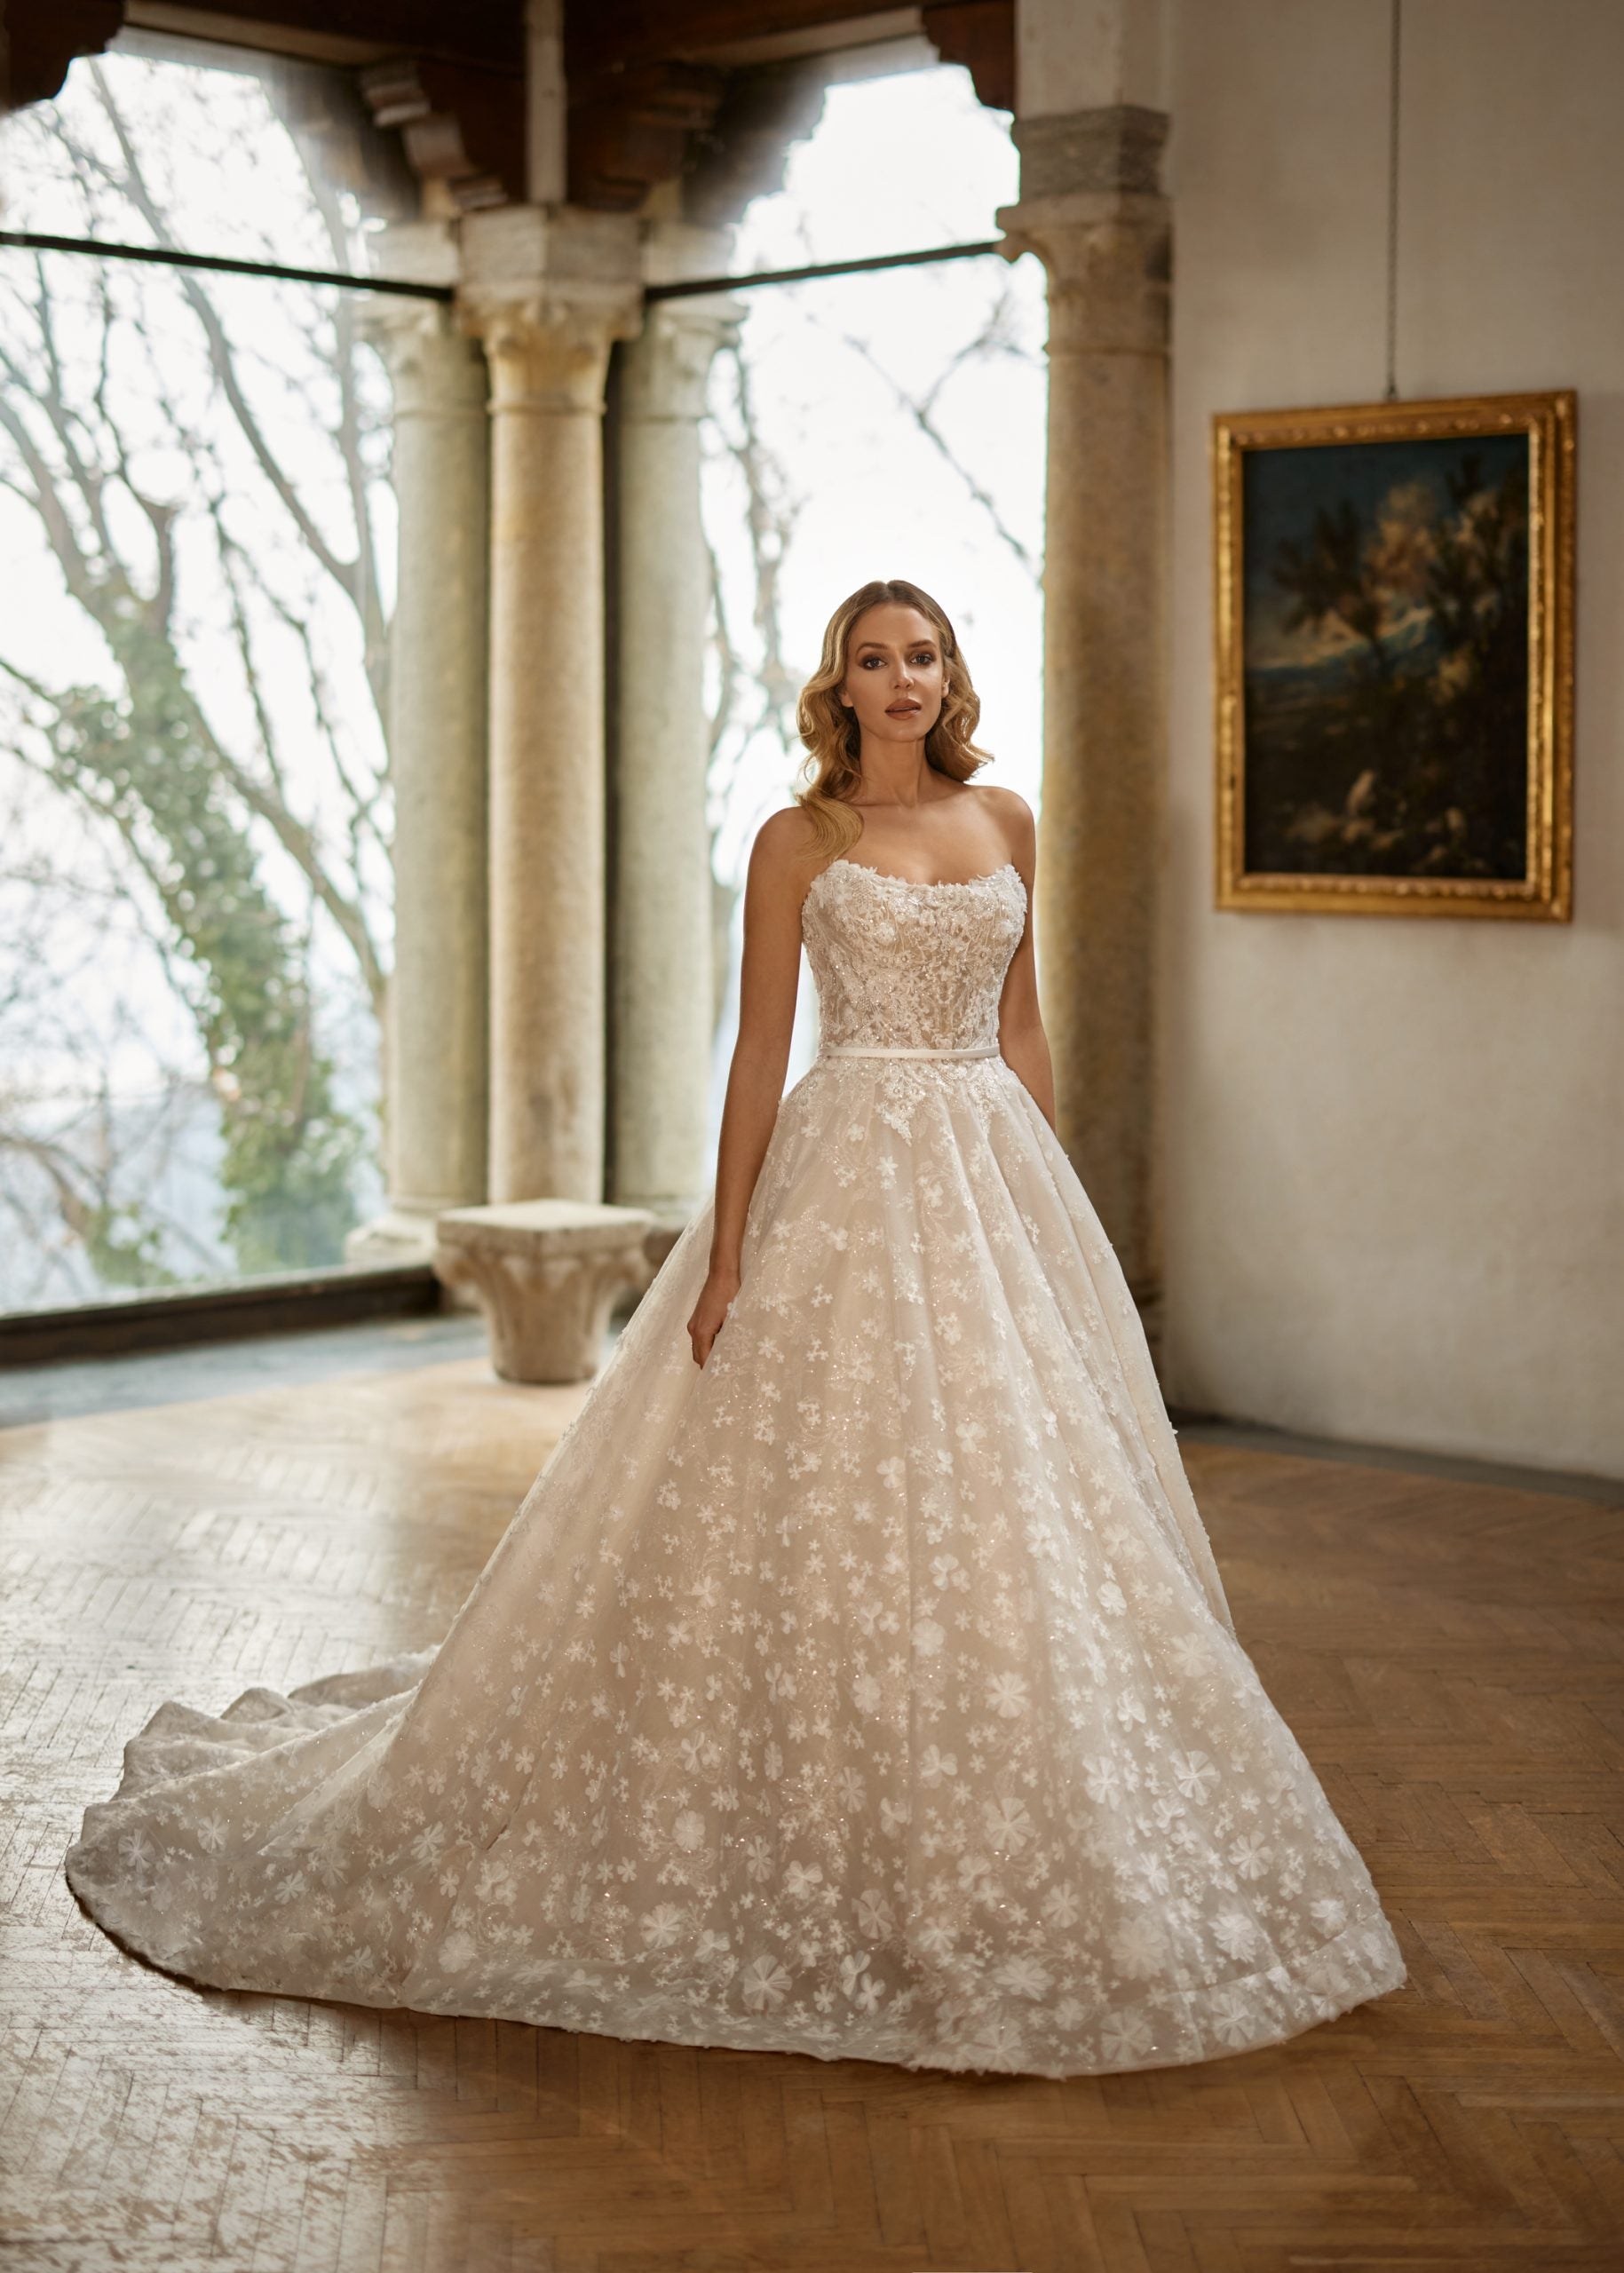 Romantic Scoop-necked Strapless Gown by Randy Fenoli - Image 1